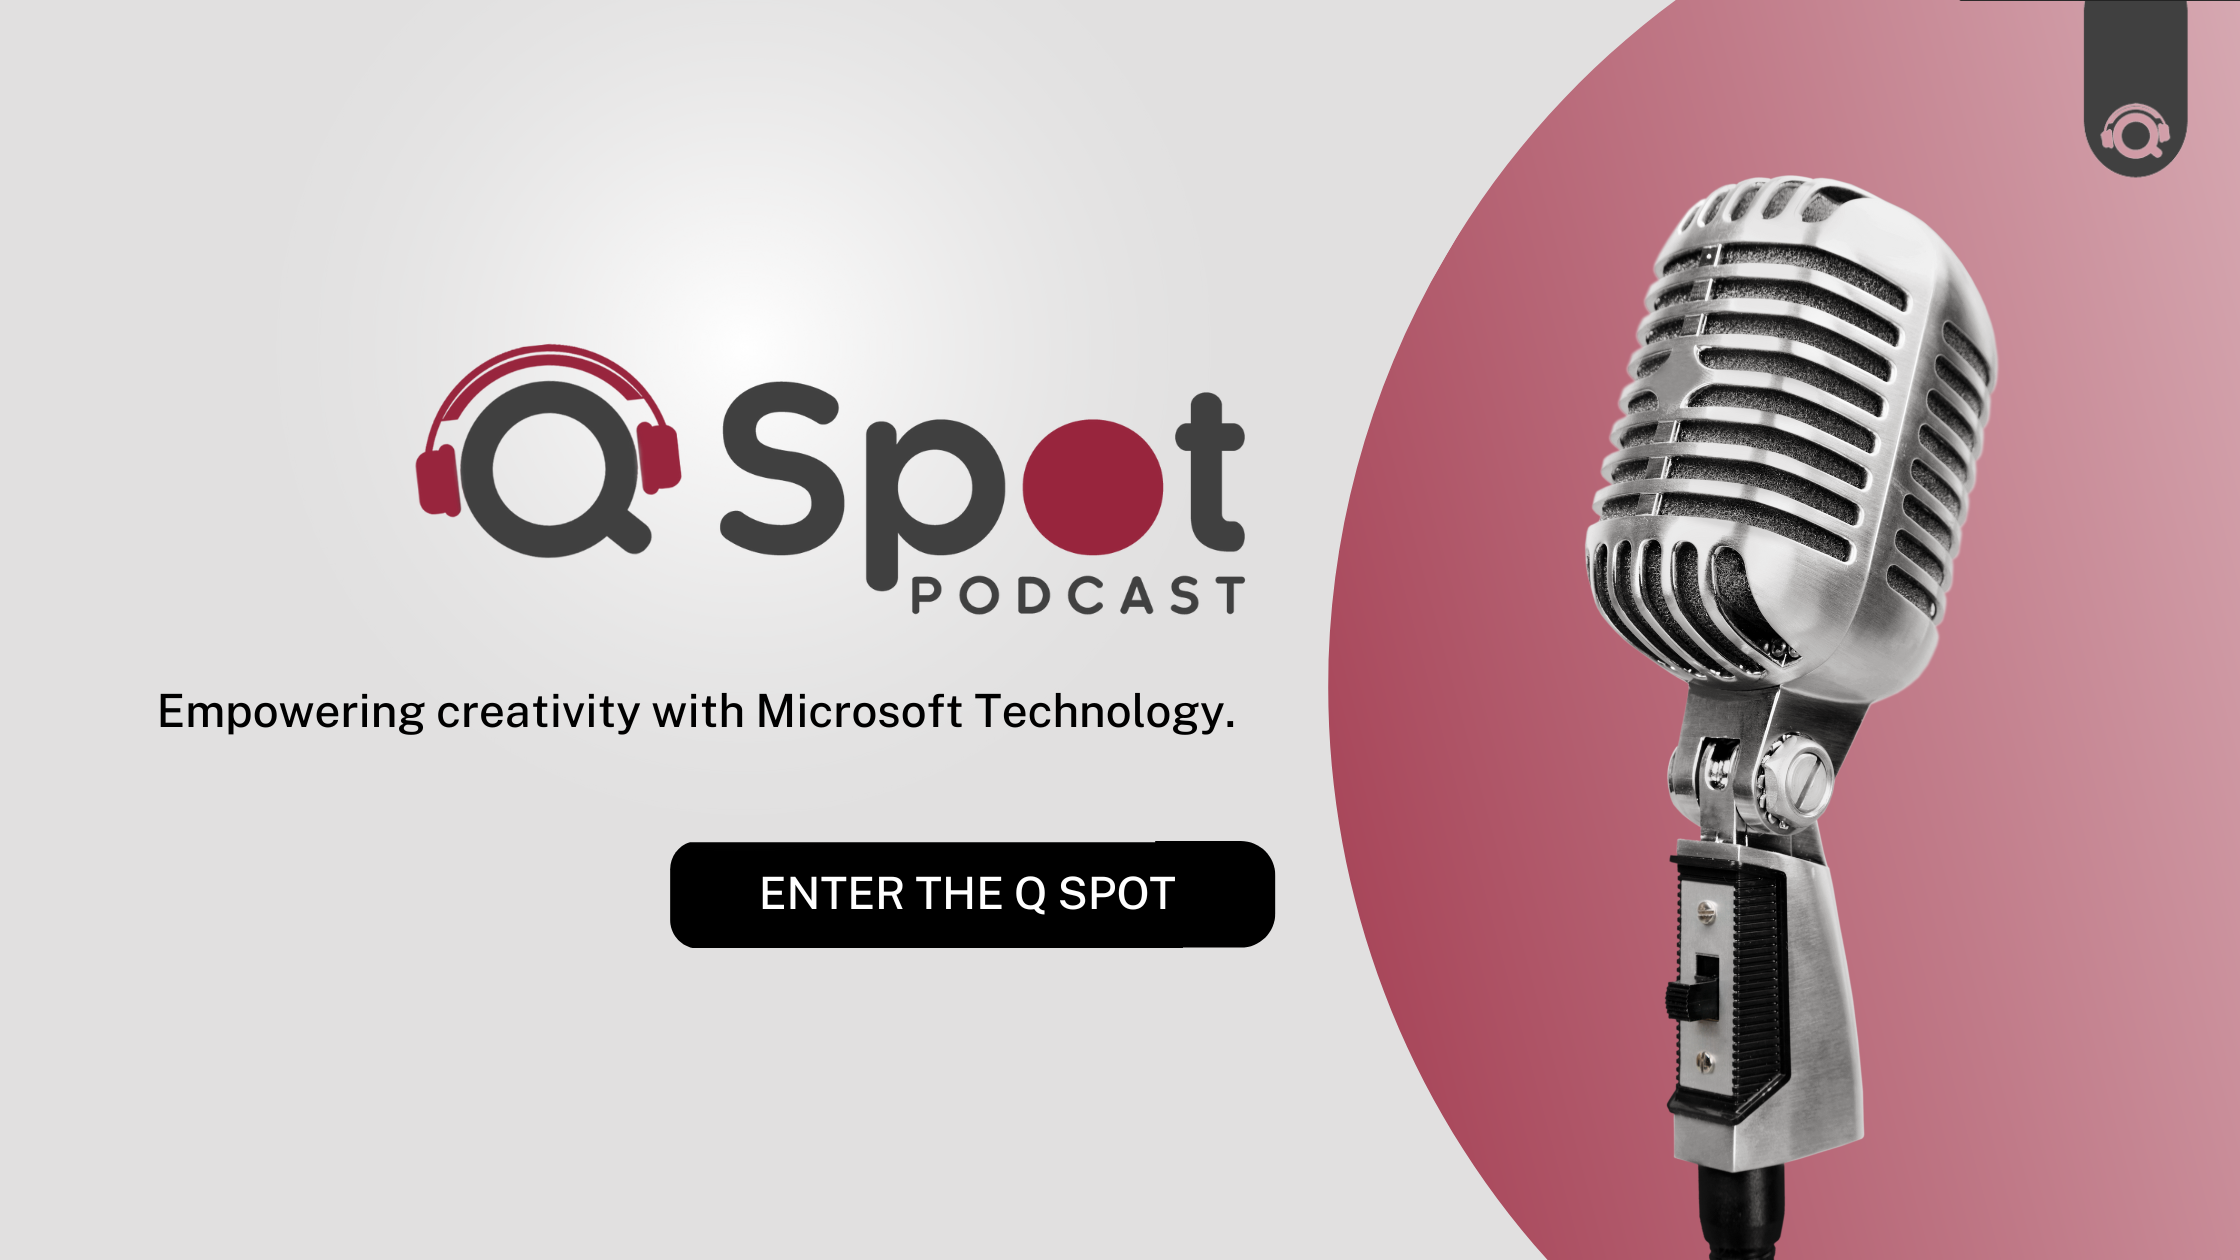 Introducing The Q Spot Podcast – Get Your Fix of Microsoft Tech